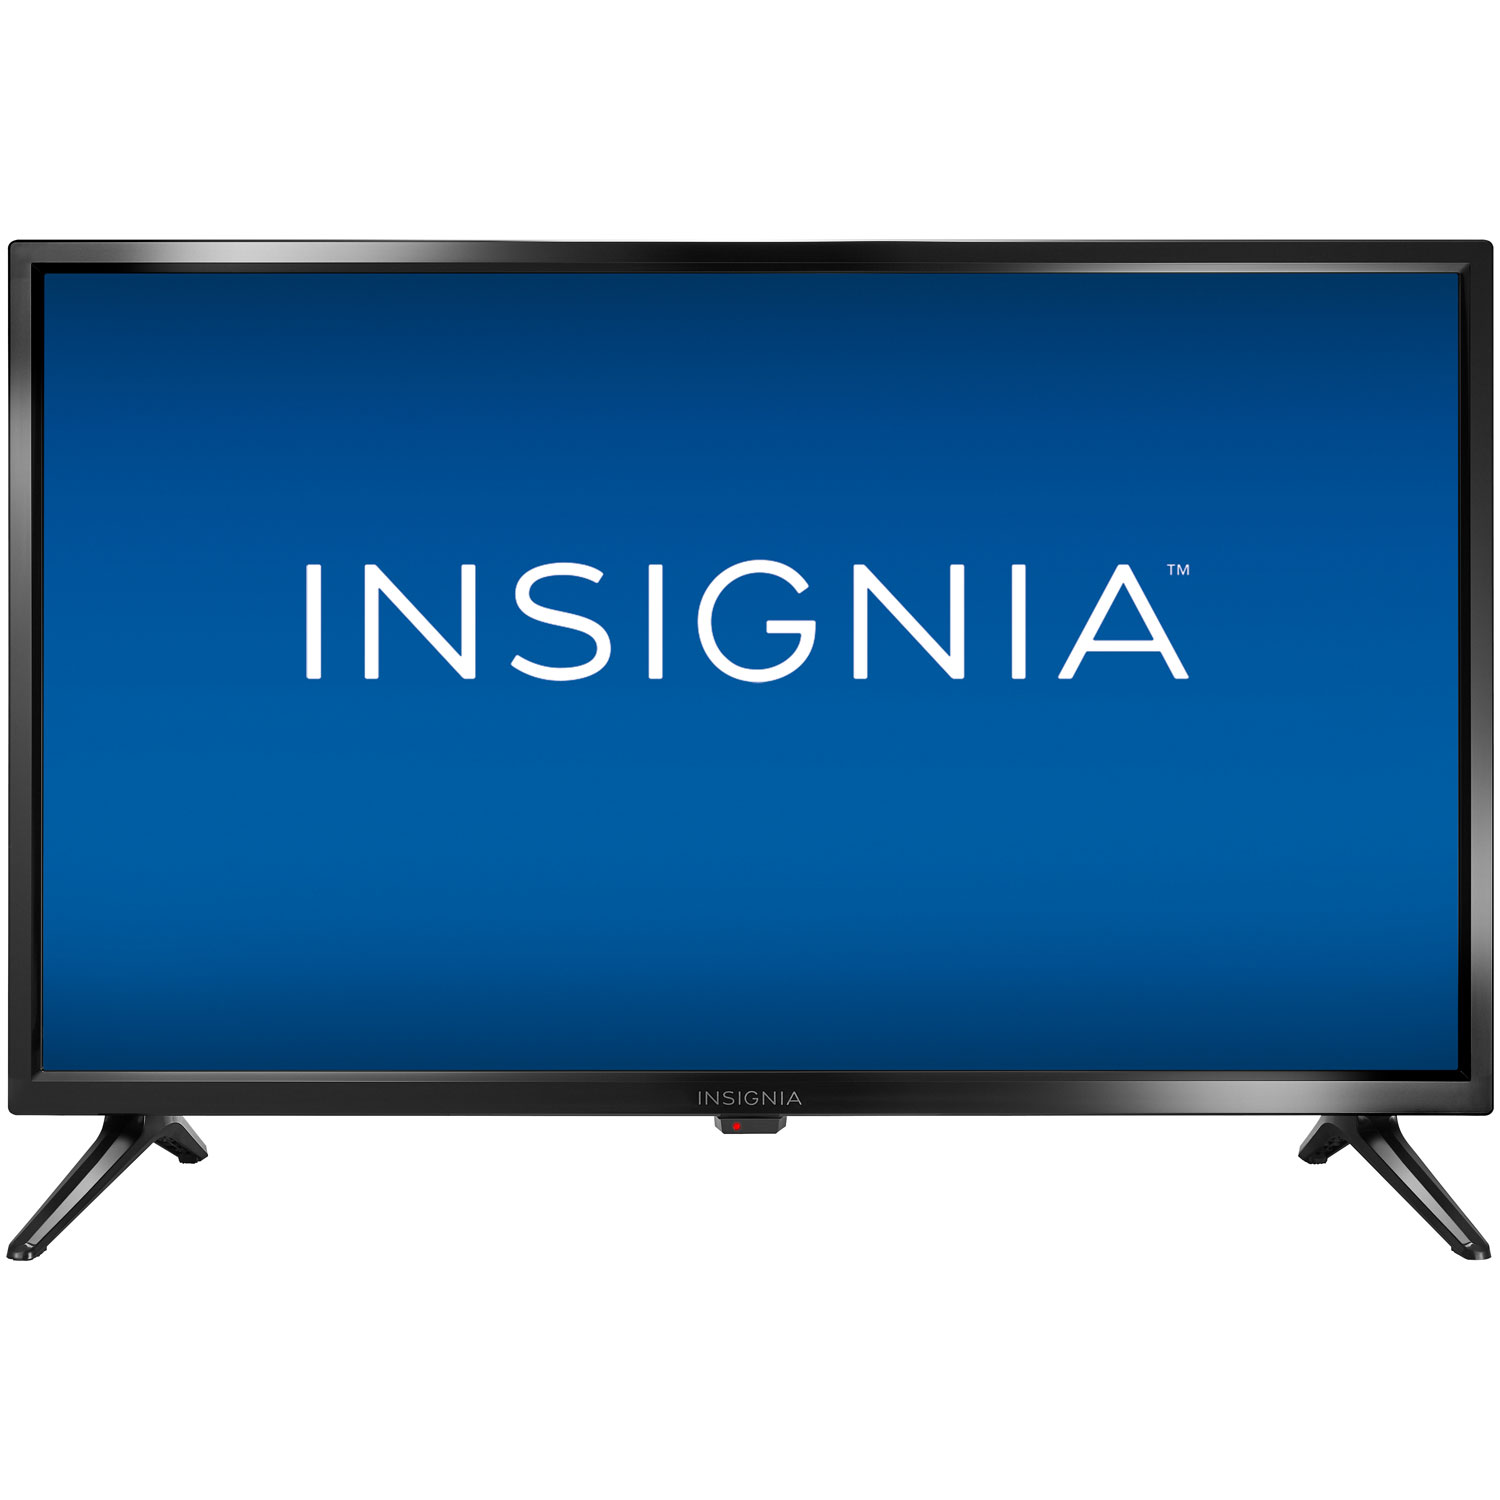 Insignia 24" 720p LED TV (NS-24D310CA21) - 2020 - Only at Best Buy